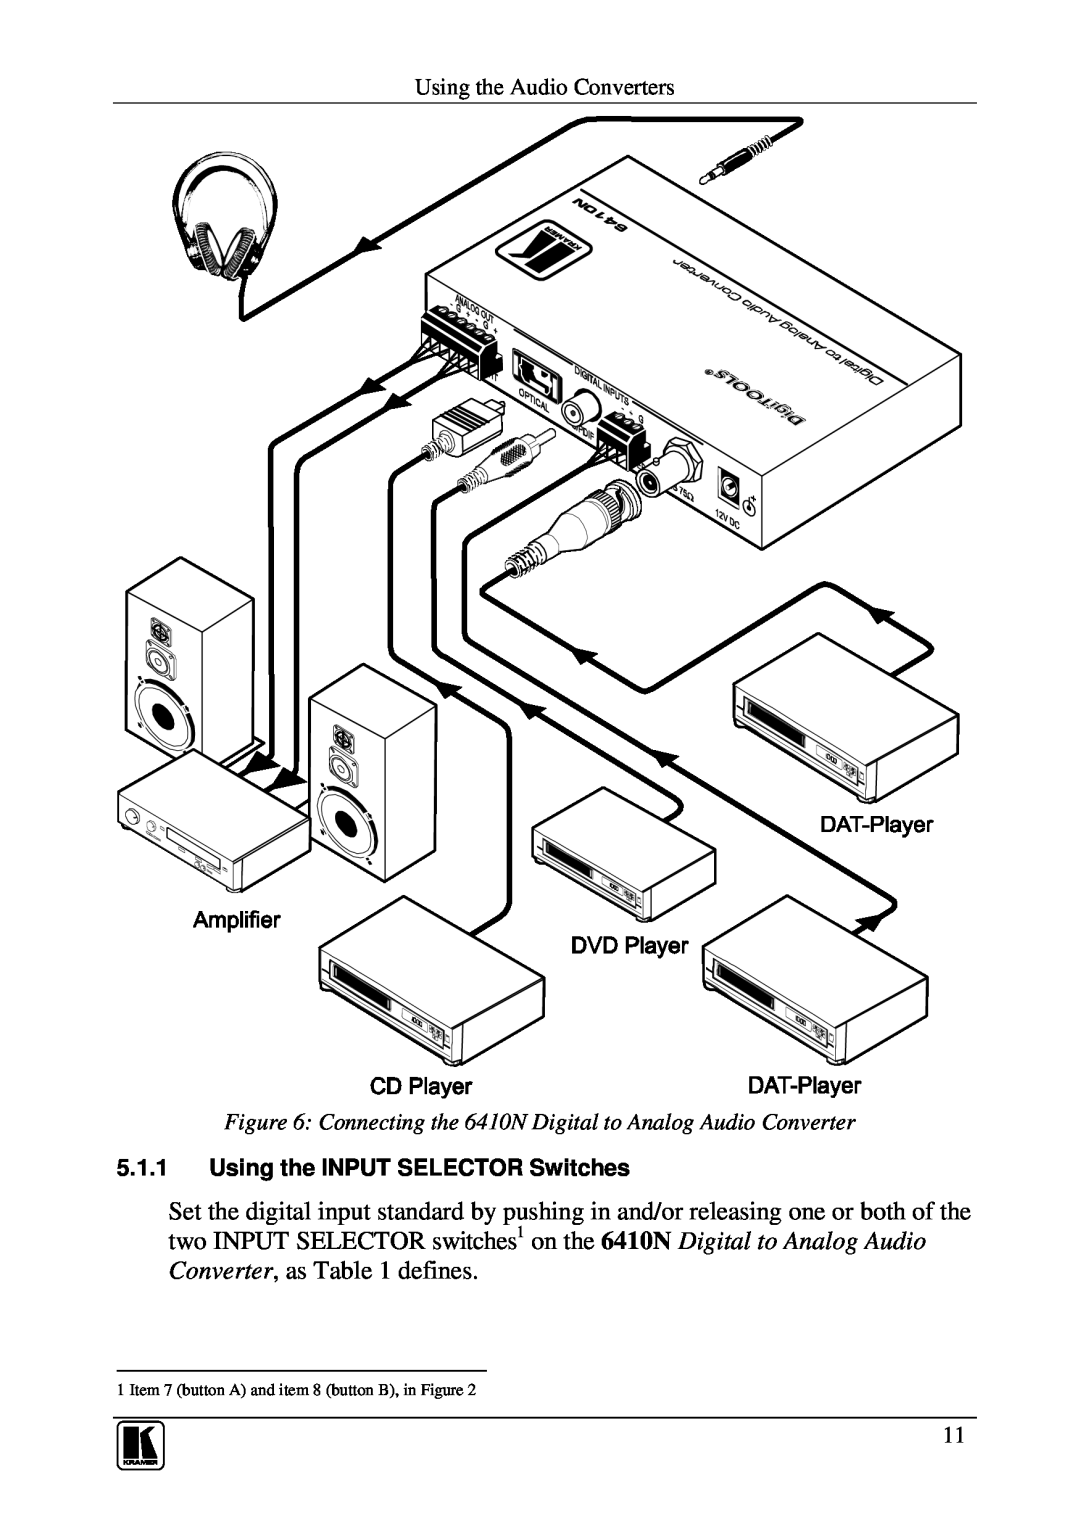 Kramer Electronics 6410N user manual F B B r, dilrp ogYpkn o, Item 7 button A and item 8 button B, in Figure 